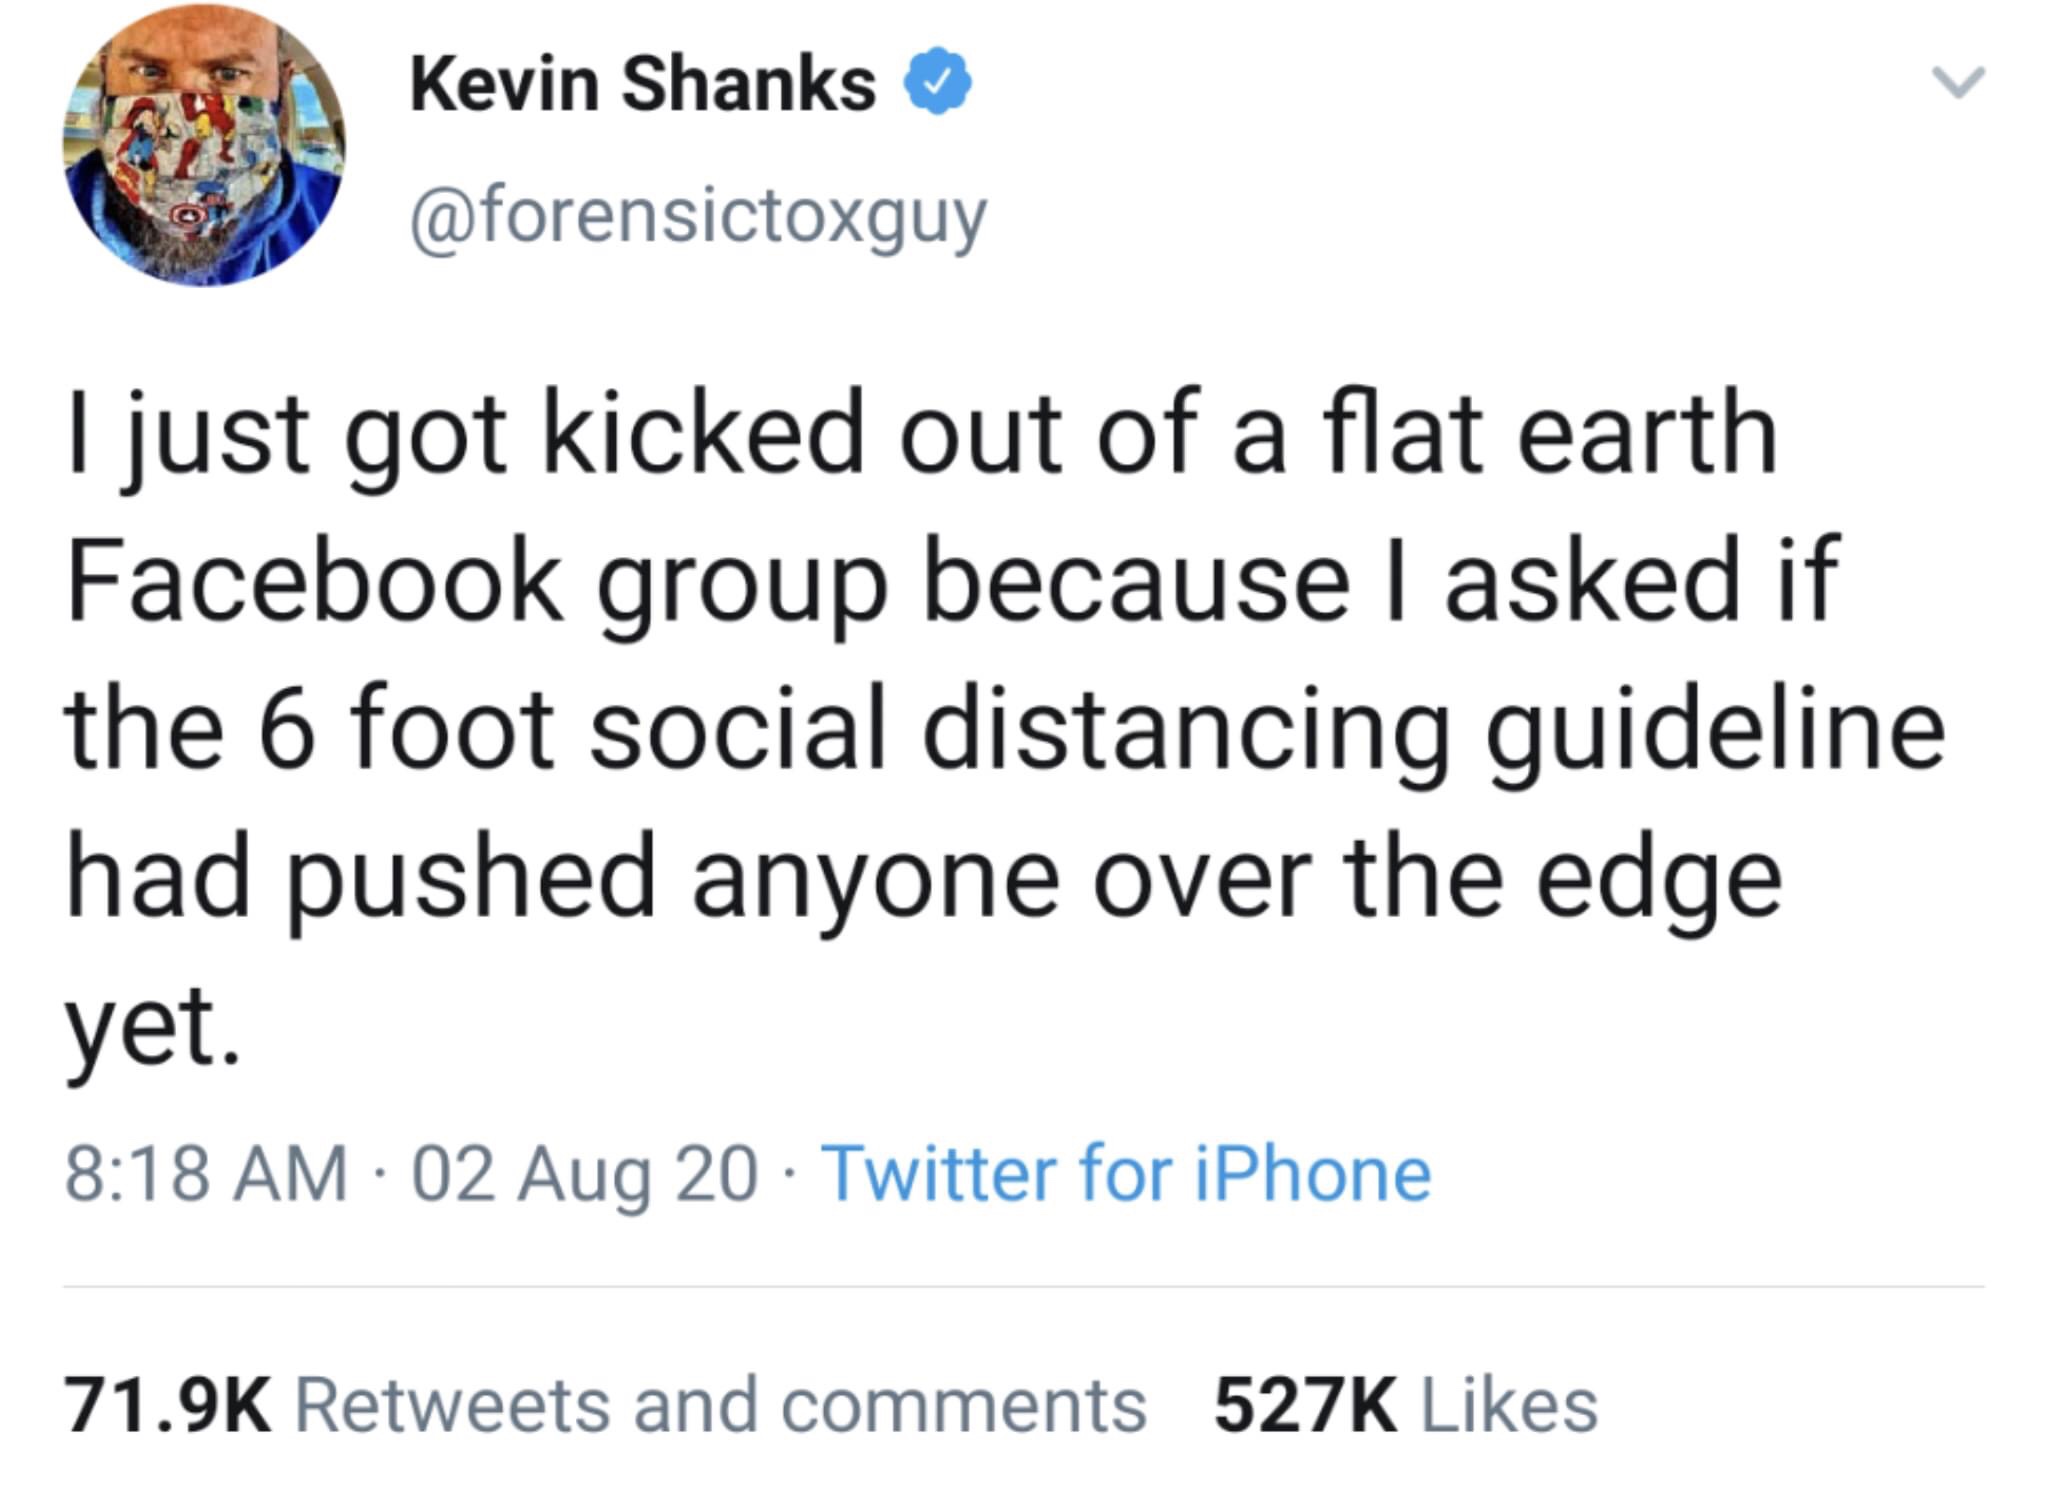 officialmonstax - Kevin Shanks I just got kicked out of a flat earth Facebook group because I asked if the 6 foot social distancing guideline had pushed anyone over the edge yet. 02 Aug 20 Twitter for iPhone and